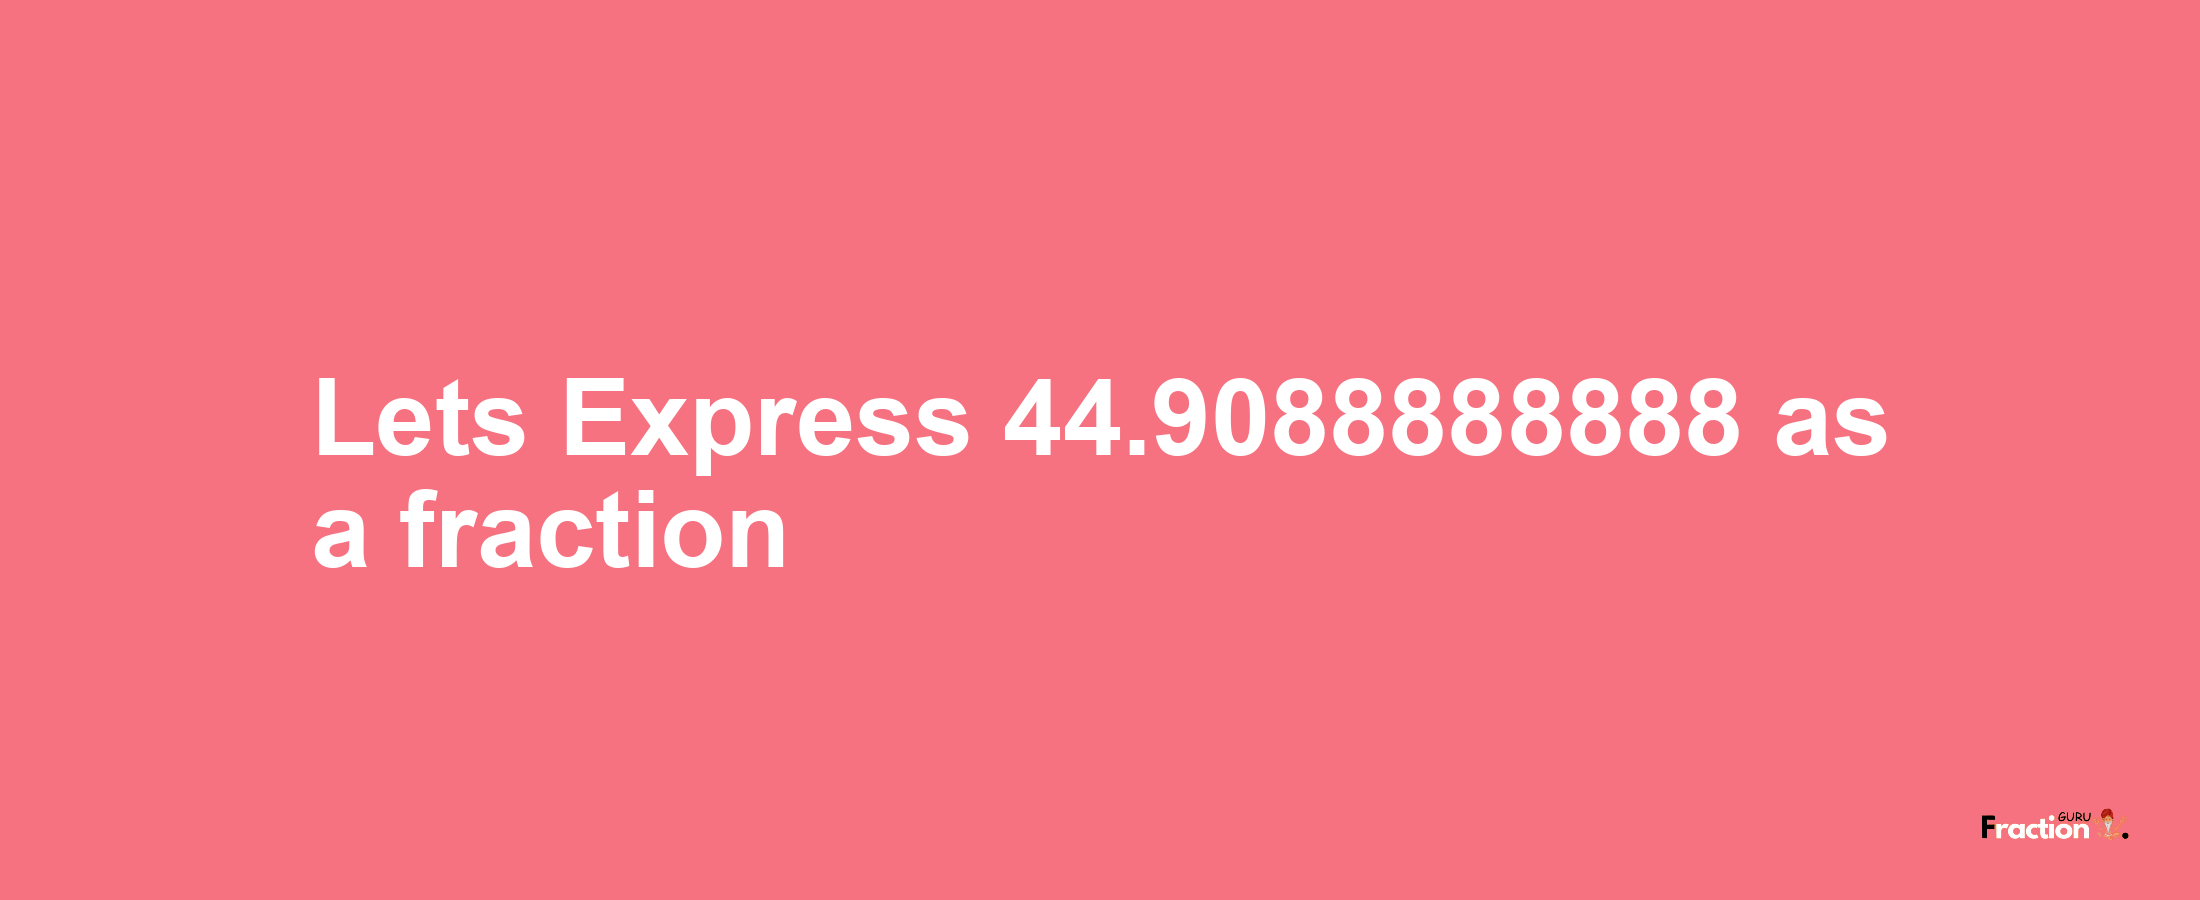 Lets Express 44.9088888888 as afraction